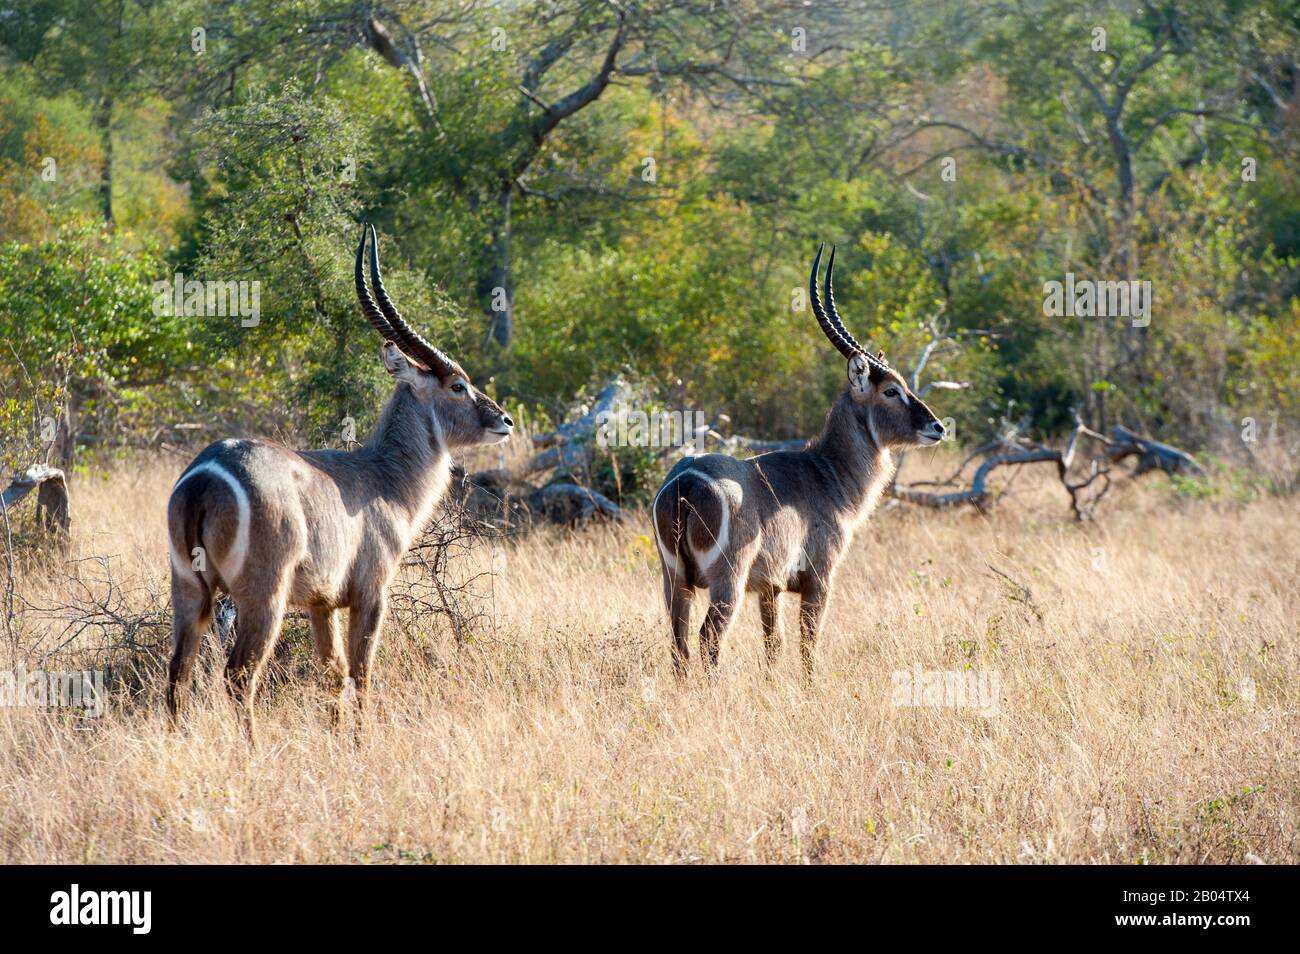 Waterbucks (Kobus ellipsiprymnus) in the Sabi Sands Game Reserve adjacent to the Kruger National Park in South Africa. Stock Photo